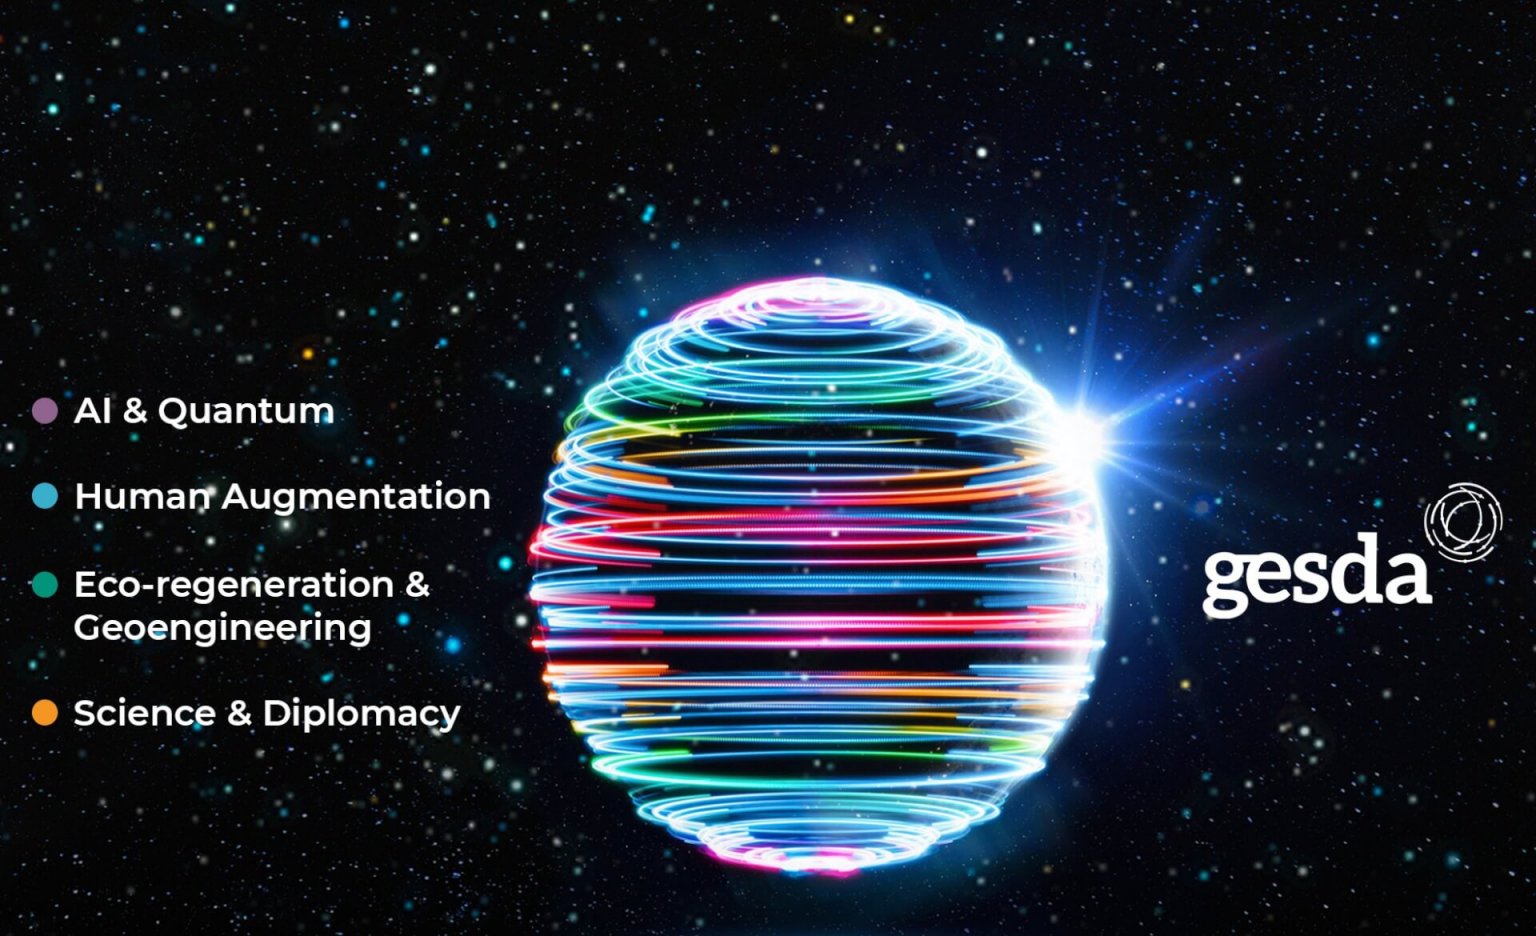 Join the GESDA Science Breakthrough Radar and share your perspective on